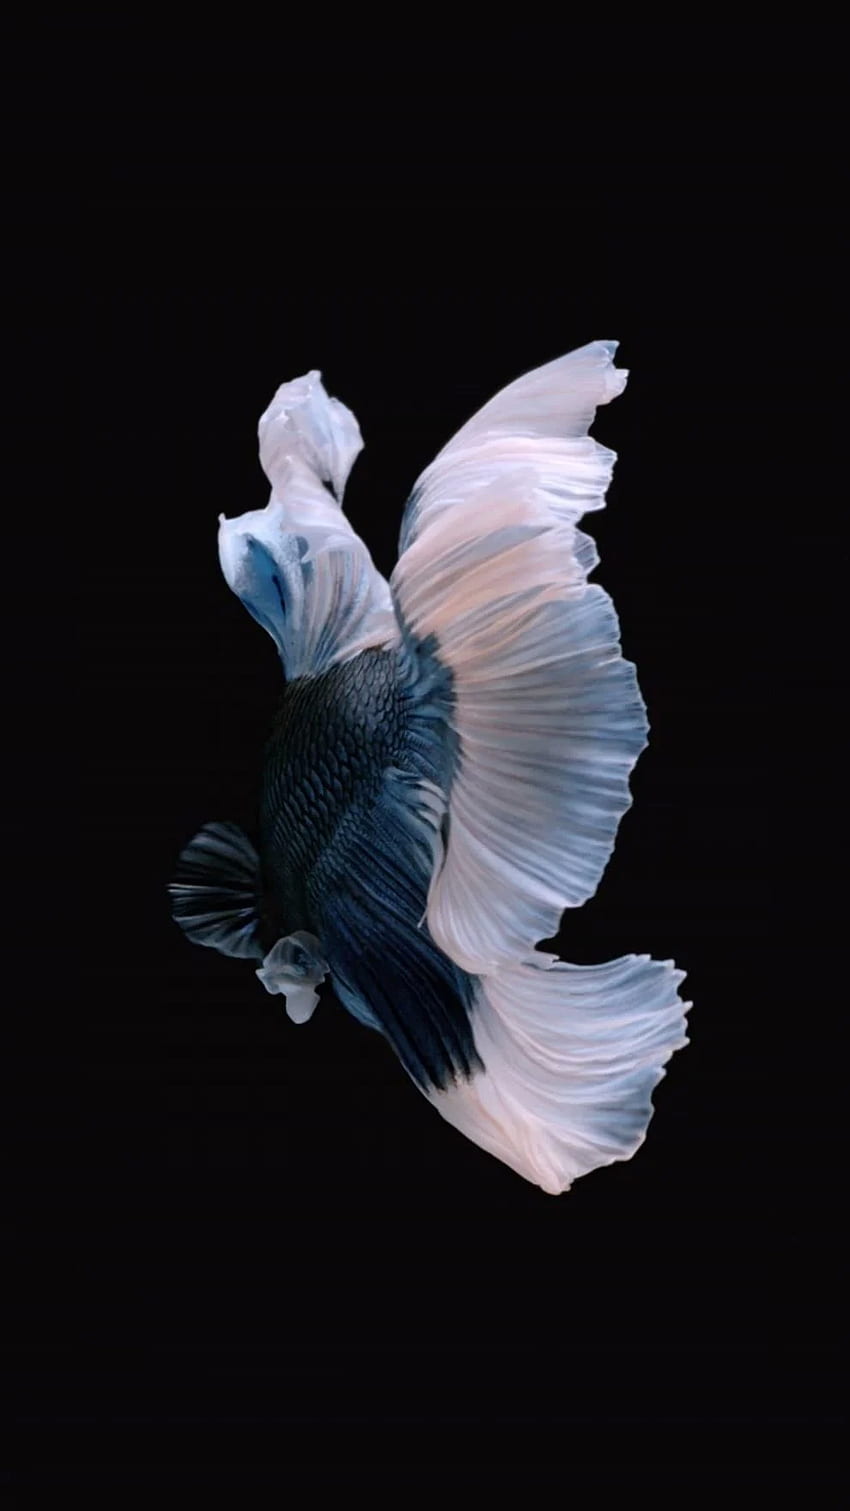 How to Get Apple's Live Fish Back on Your iPhone in iOS, Custom 5S Dynamic HD phone wallpaper